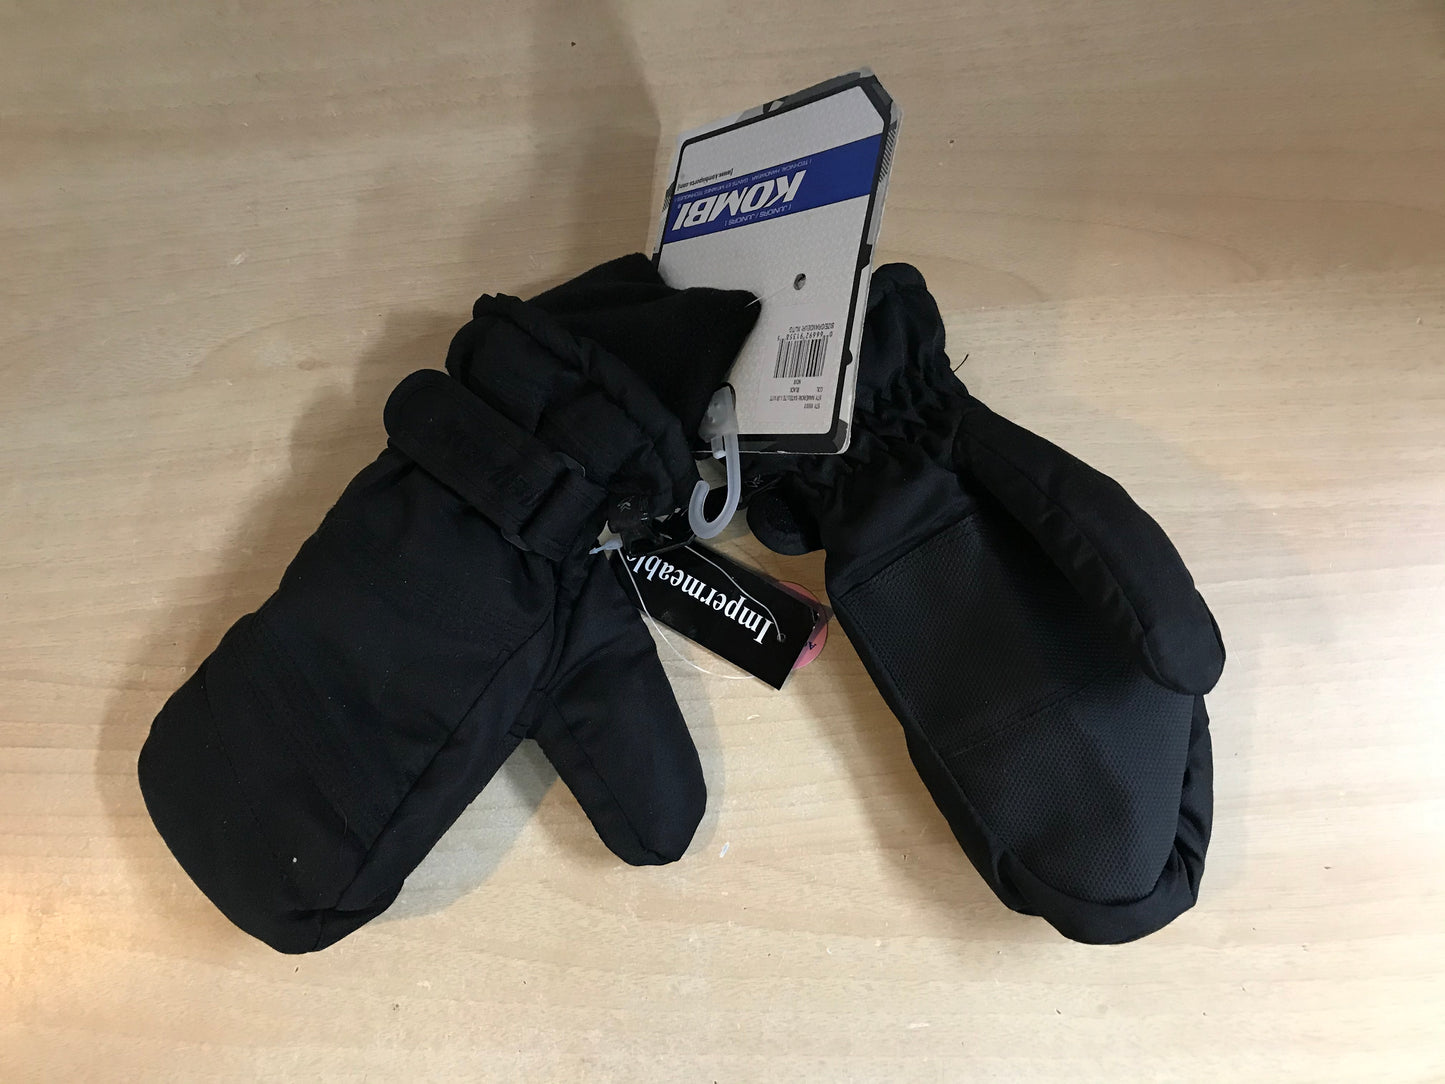 Winter Gloves and Mitts Child Size 12-14 Kombi Black NEW With Tags